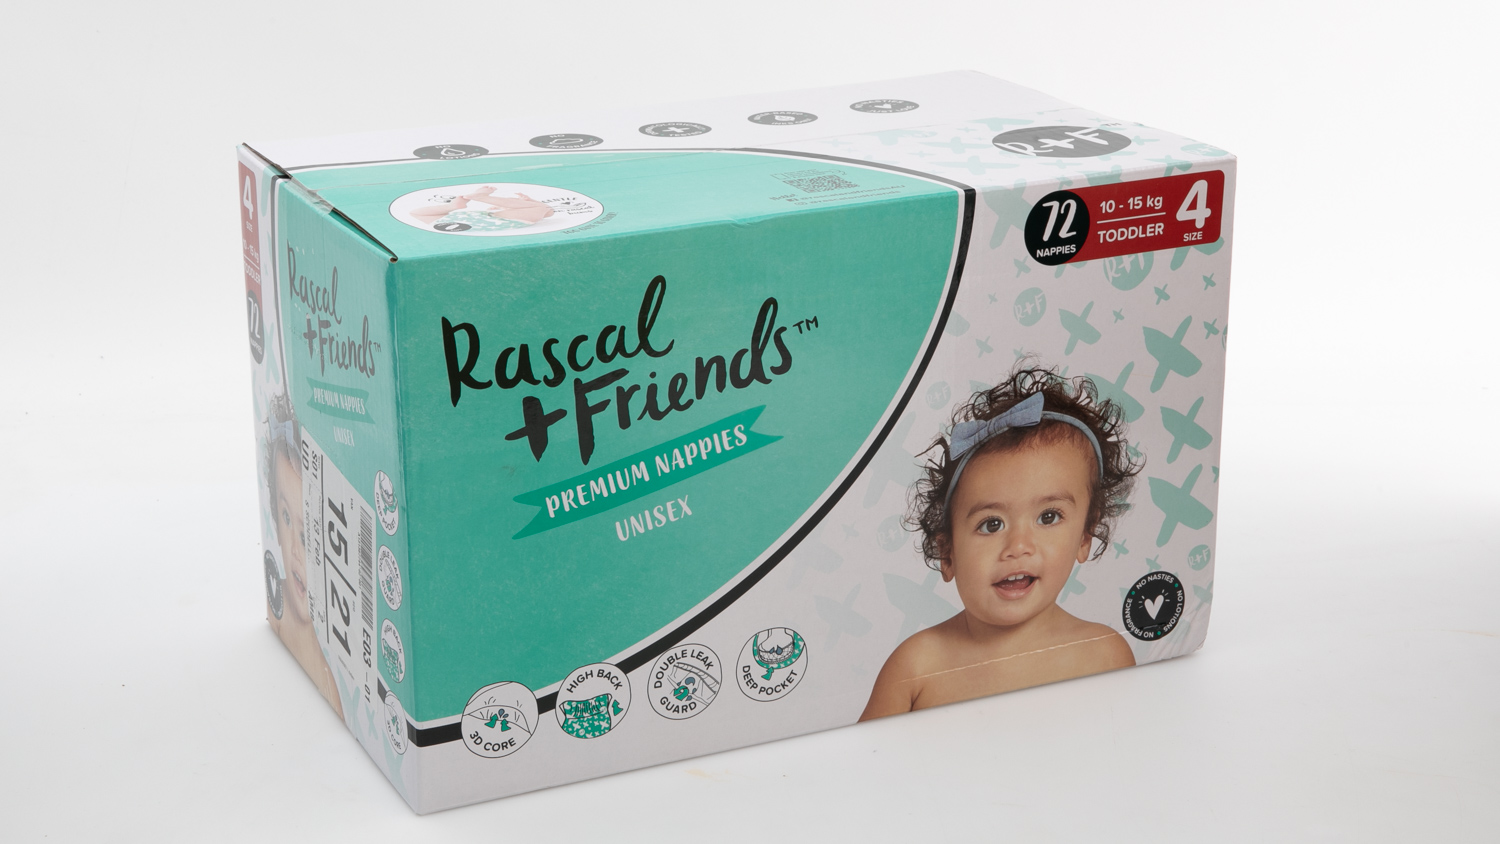 Rascal + Friends Premium Nappies Unisex Toddler Size 4 carousel image